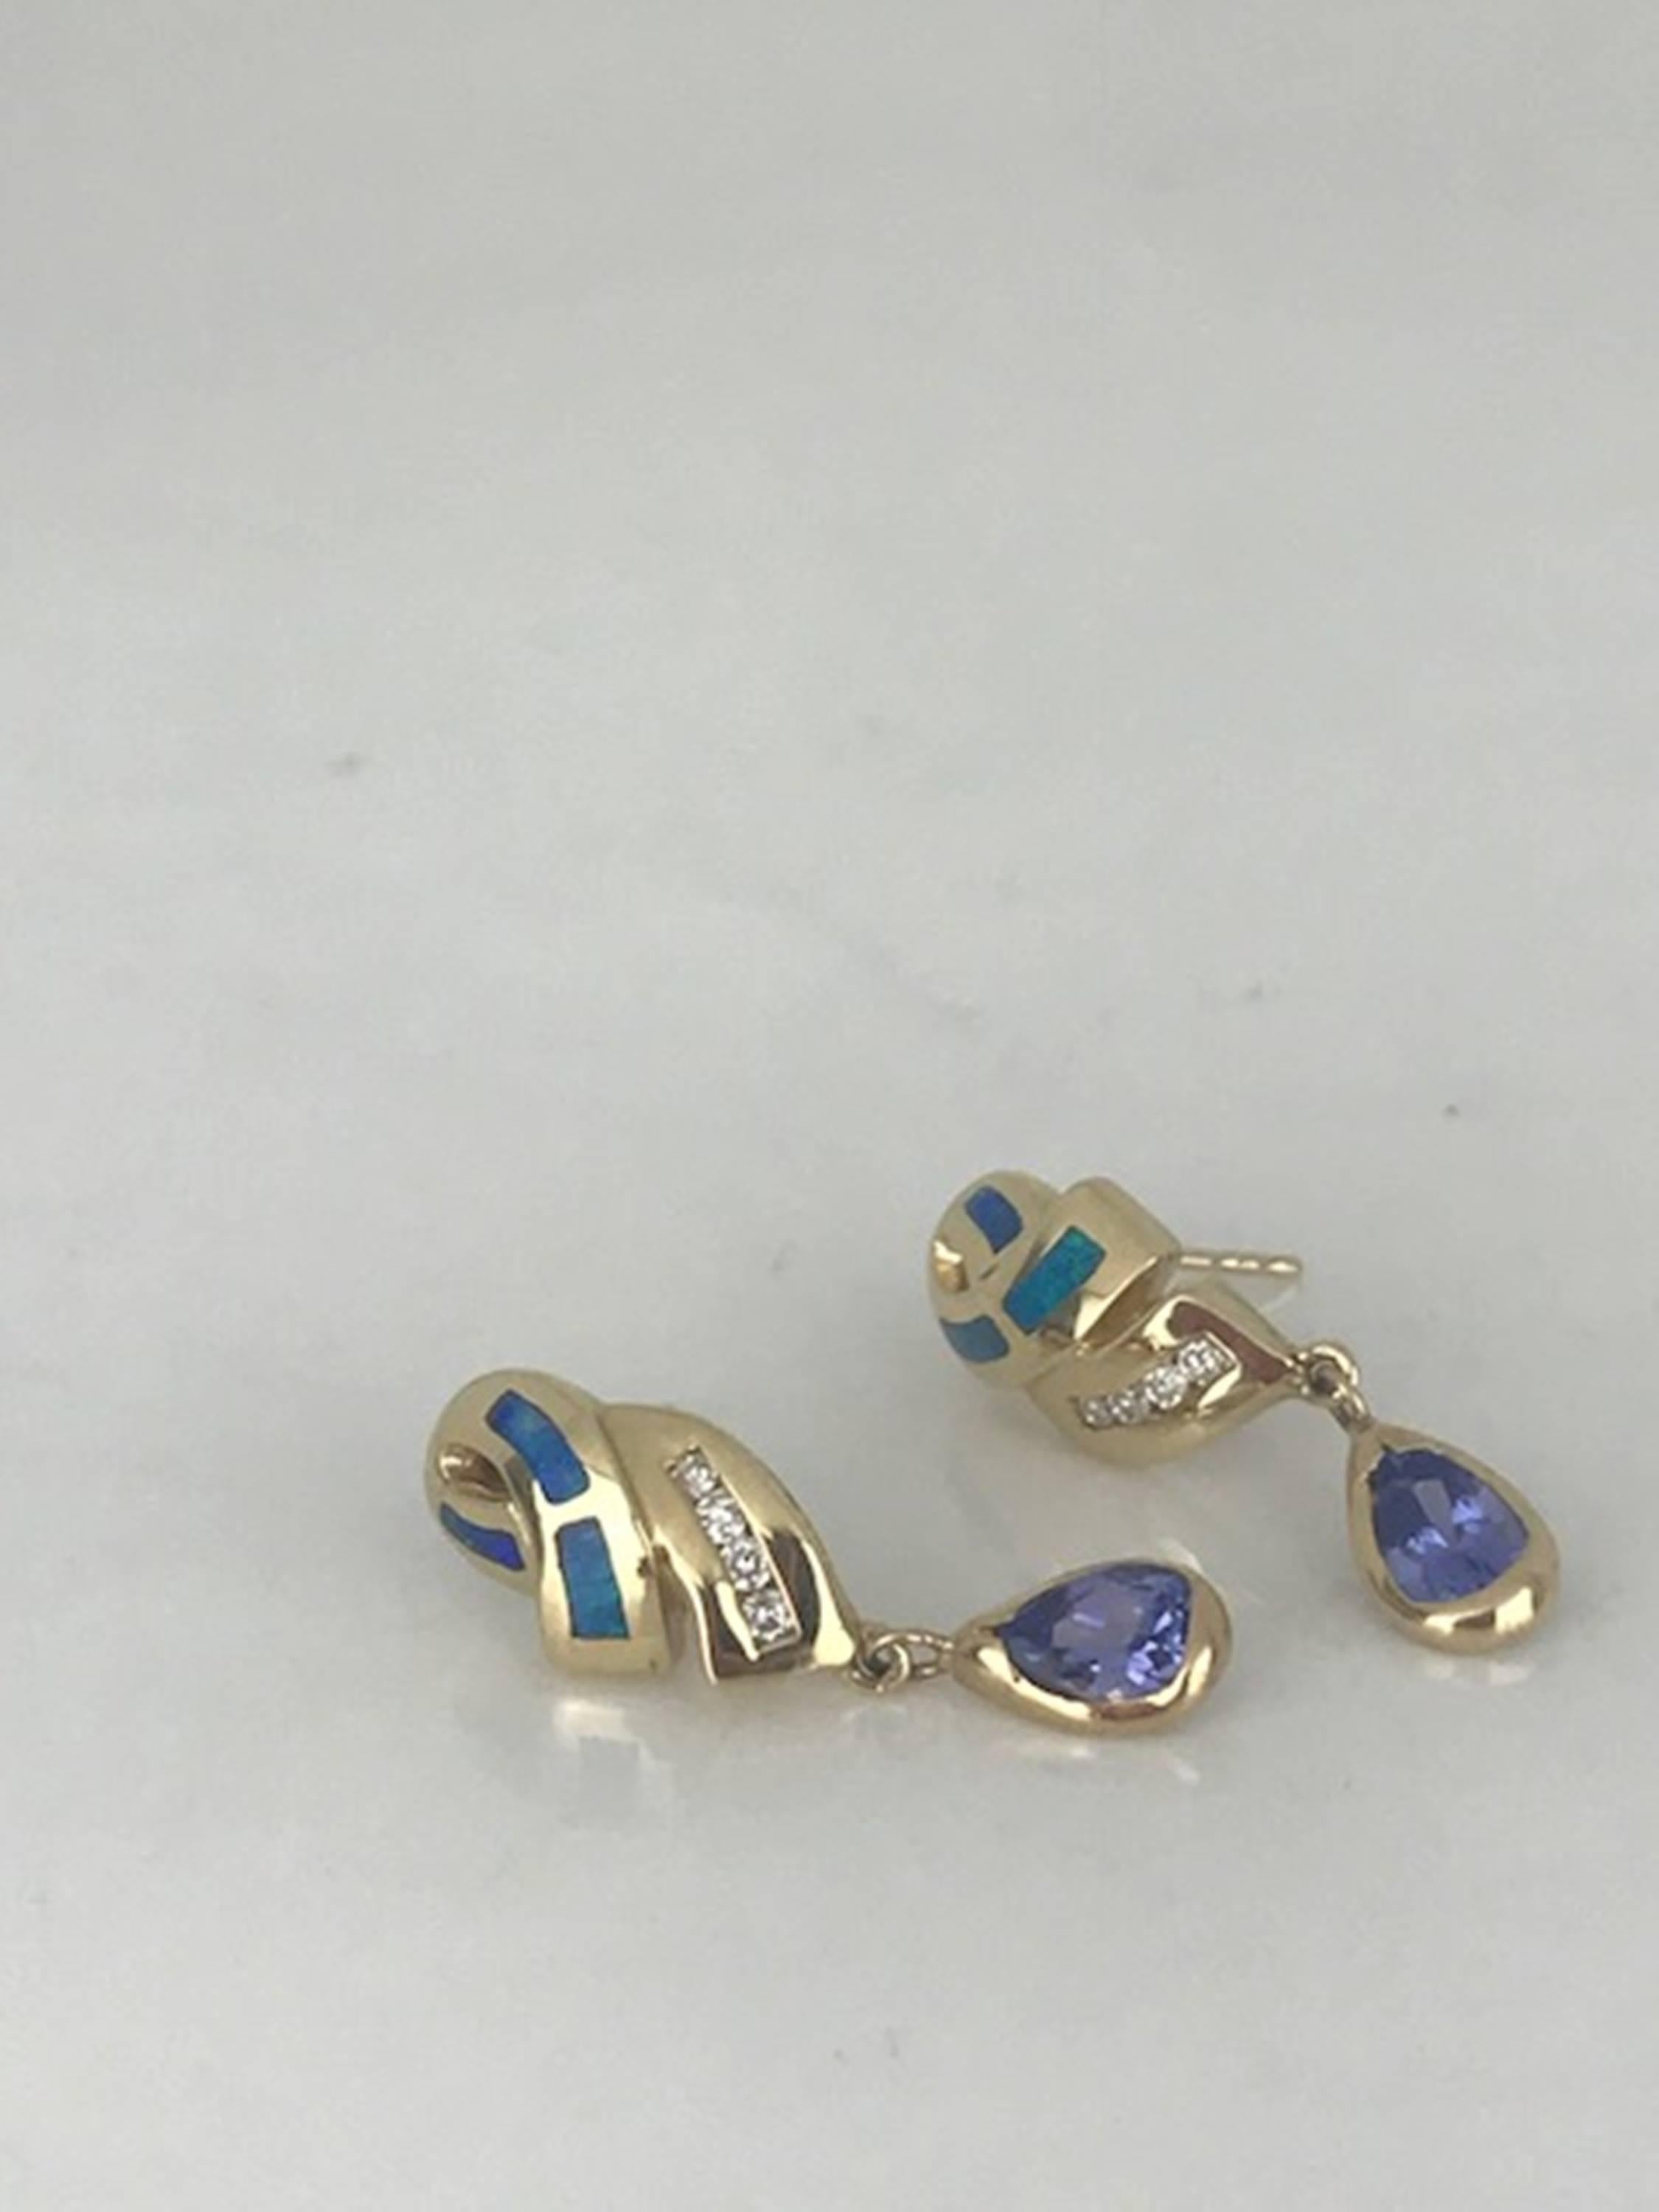 Stunning, tanzanite diamond earrings dangling with these 14 karat yellow gold drops. 
Tanzanites each measure 6.38 x 4.9 x 3.41 millimeters and are encased is a bezel. Circa 1985
The (8) round diamonds are channel set and have a total weight of